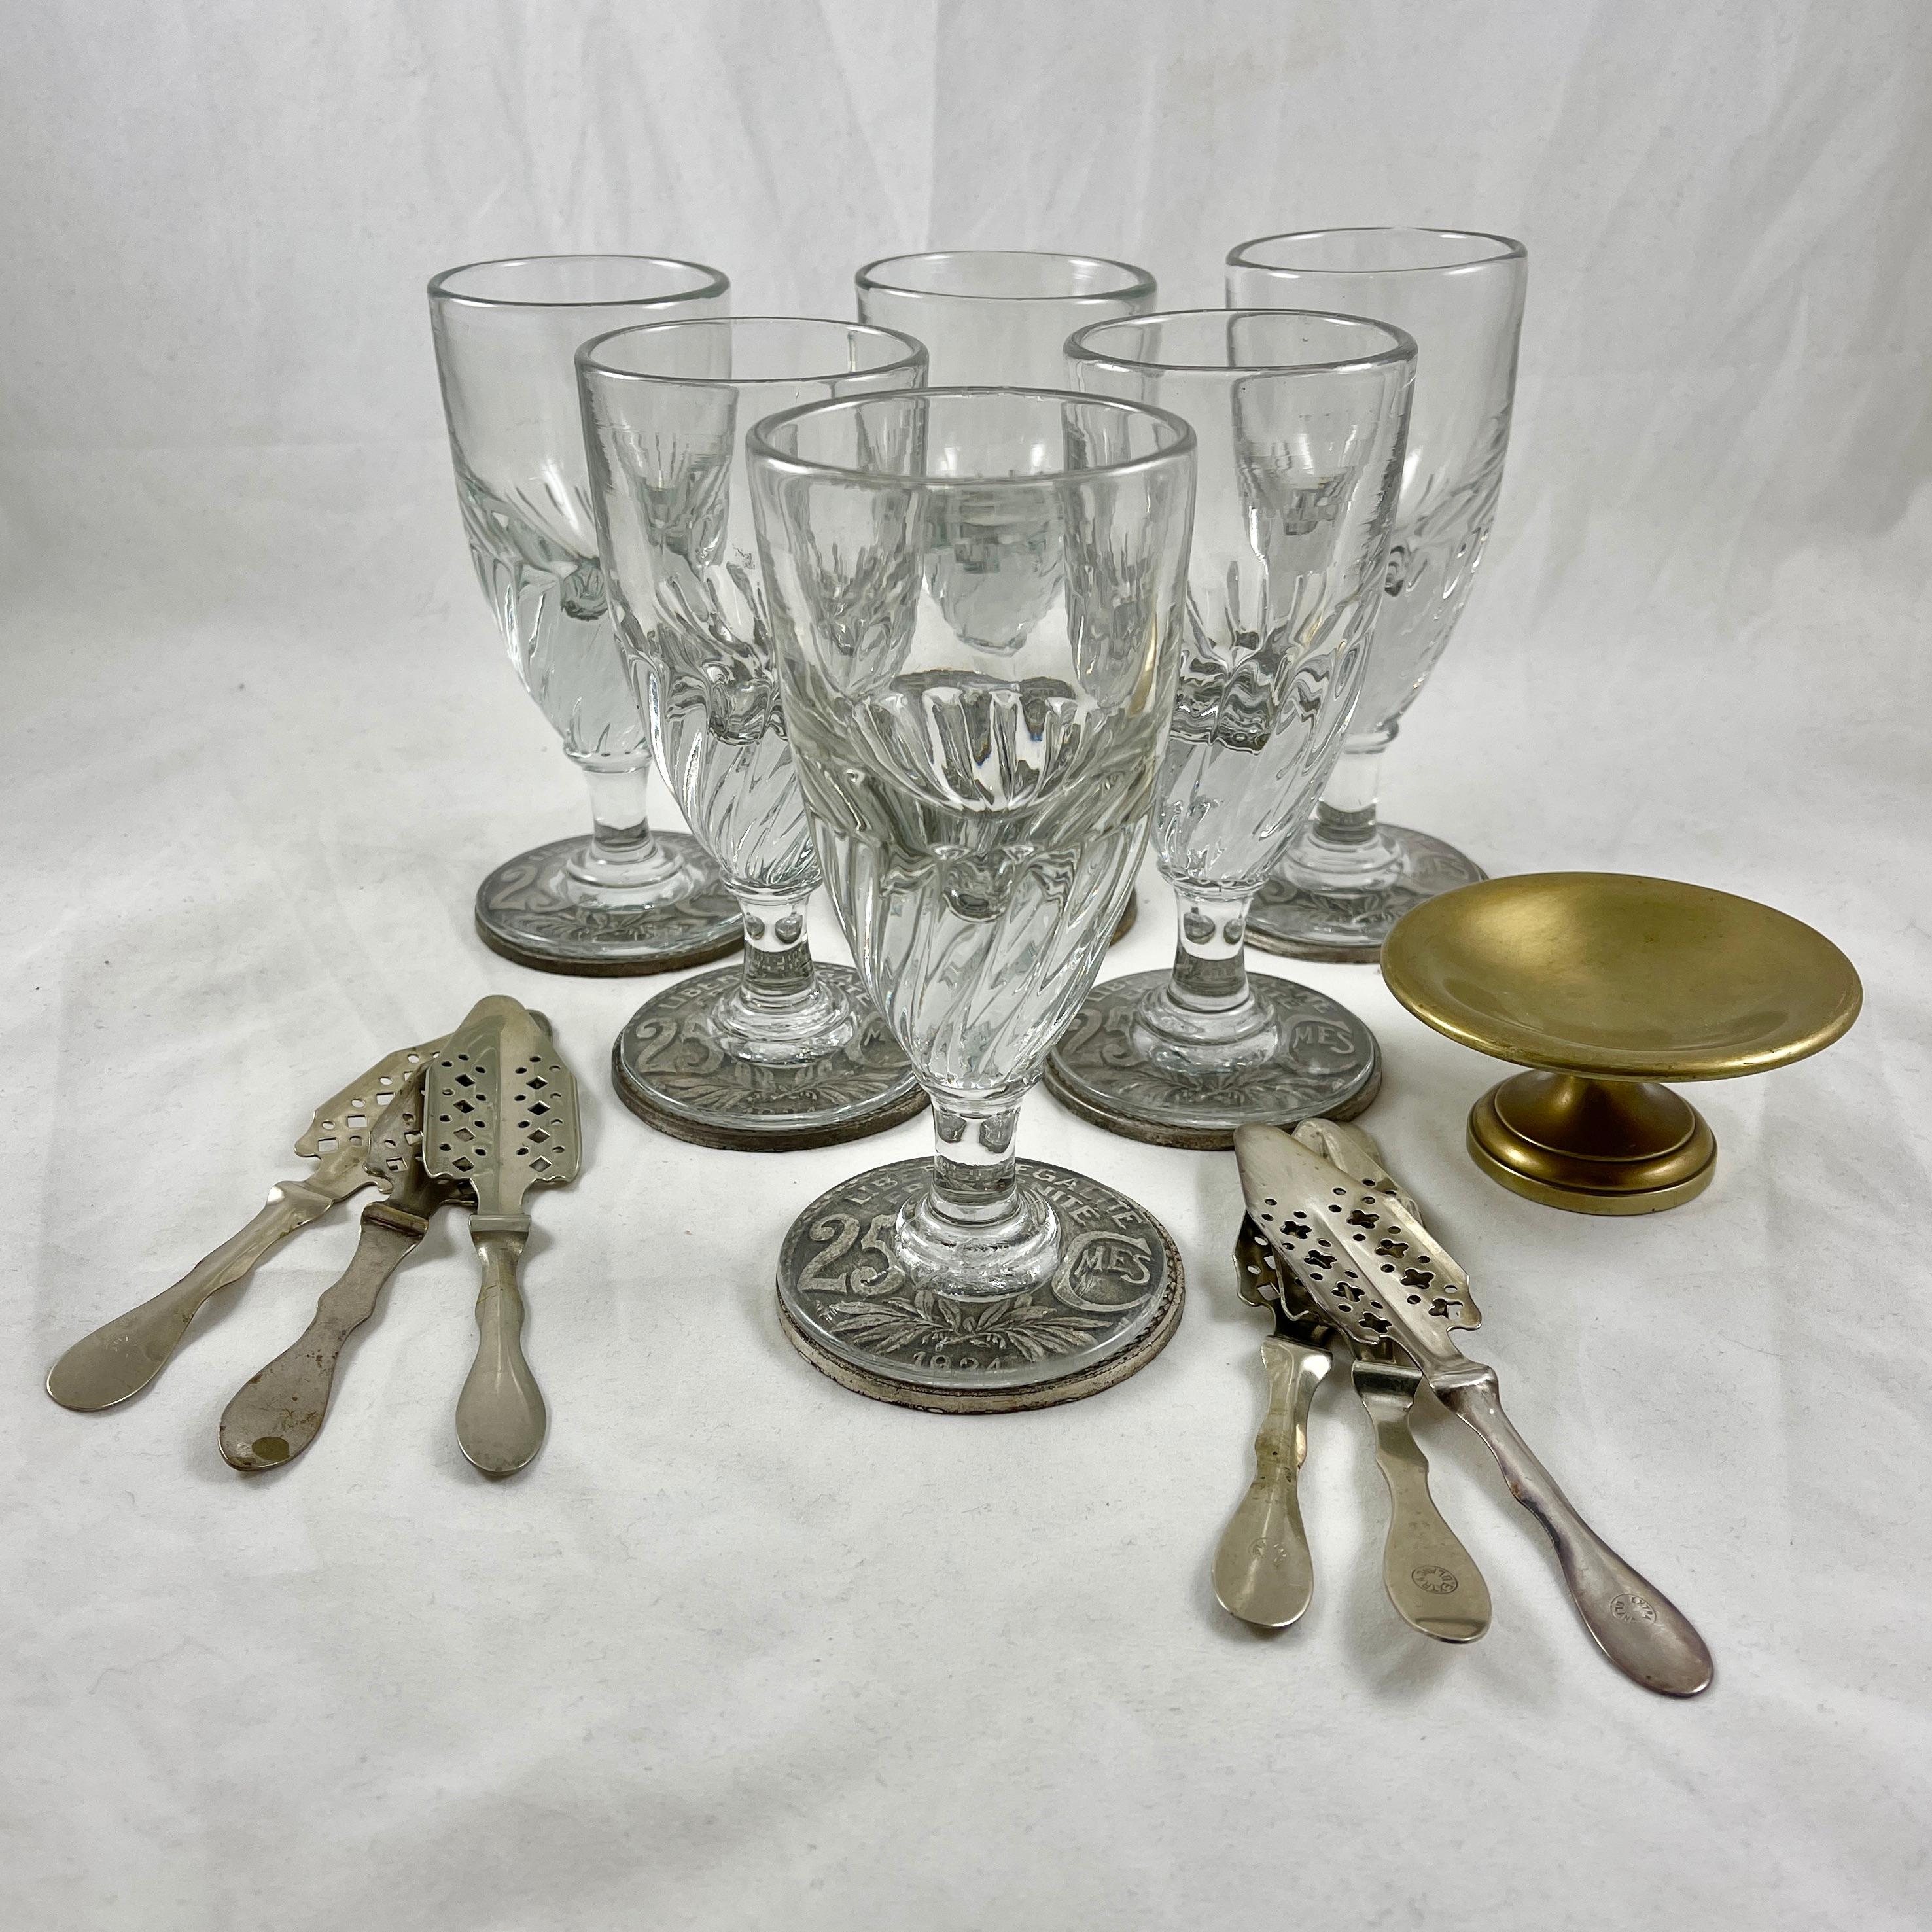 Belle Époque Late 19th C French Six Hand Blown Absinthe Glasses and Accessories, 19 Pc. Set